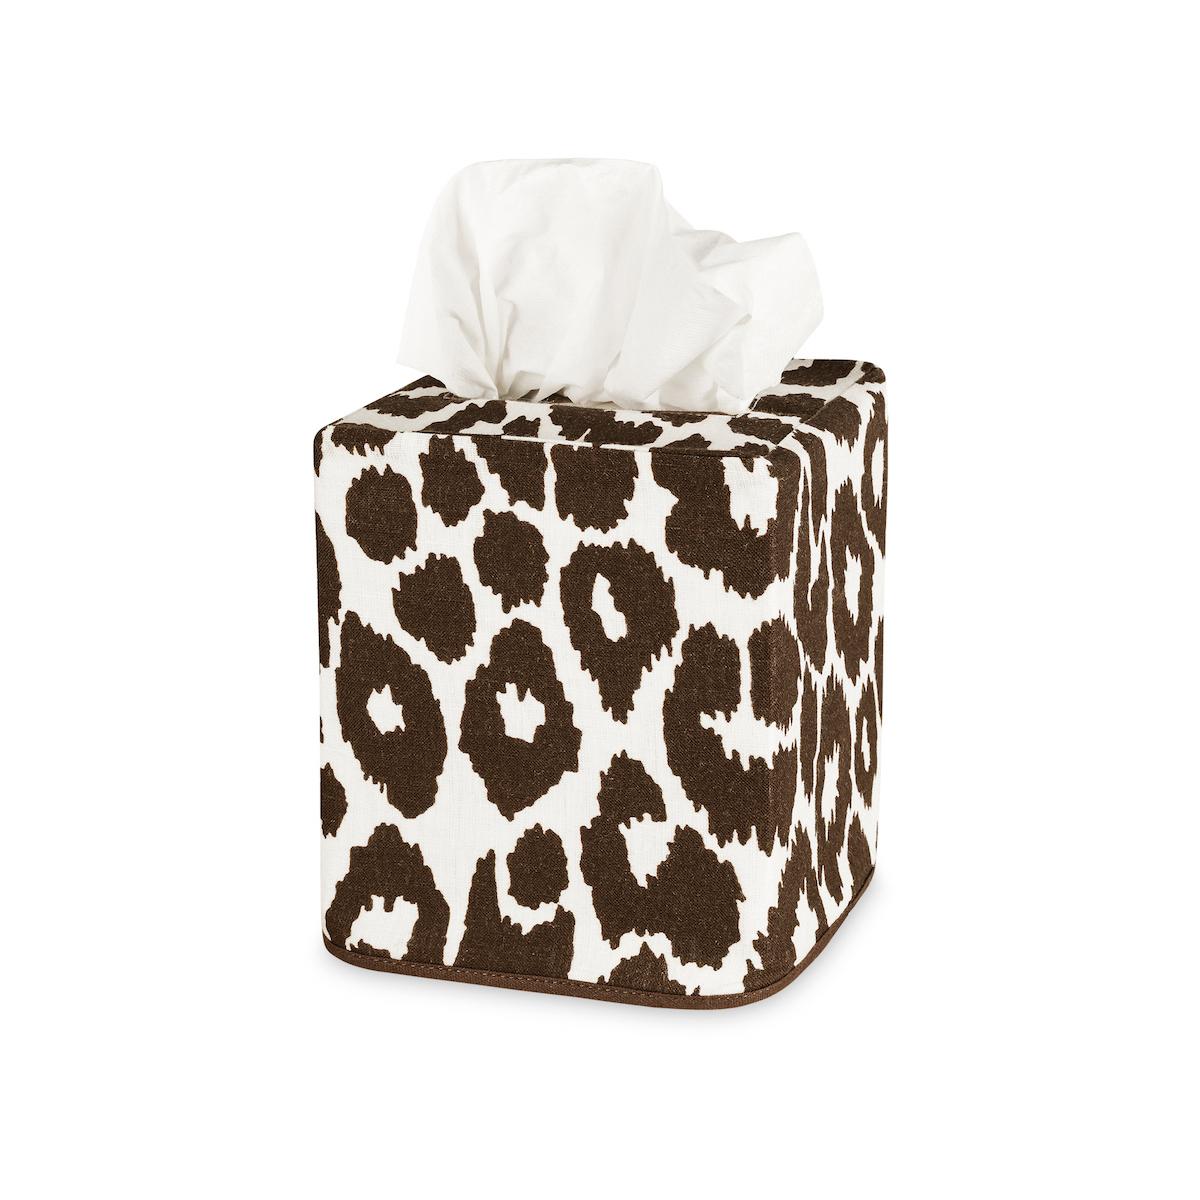 Iconic Leopard Tissue Box Cover_CINDER